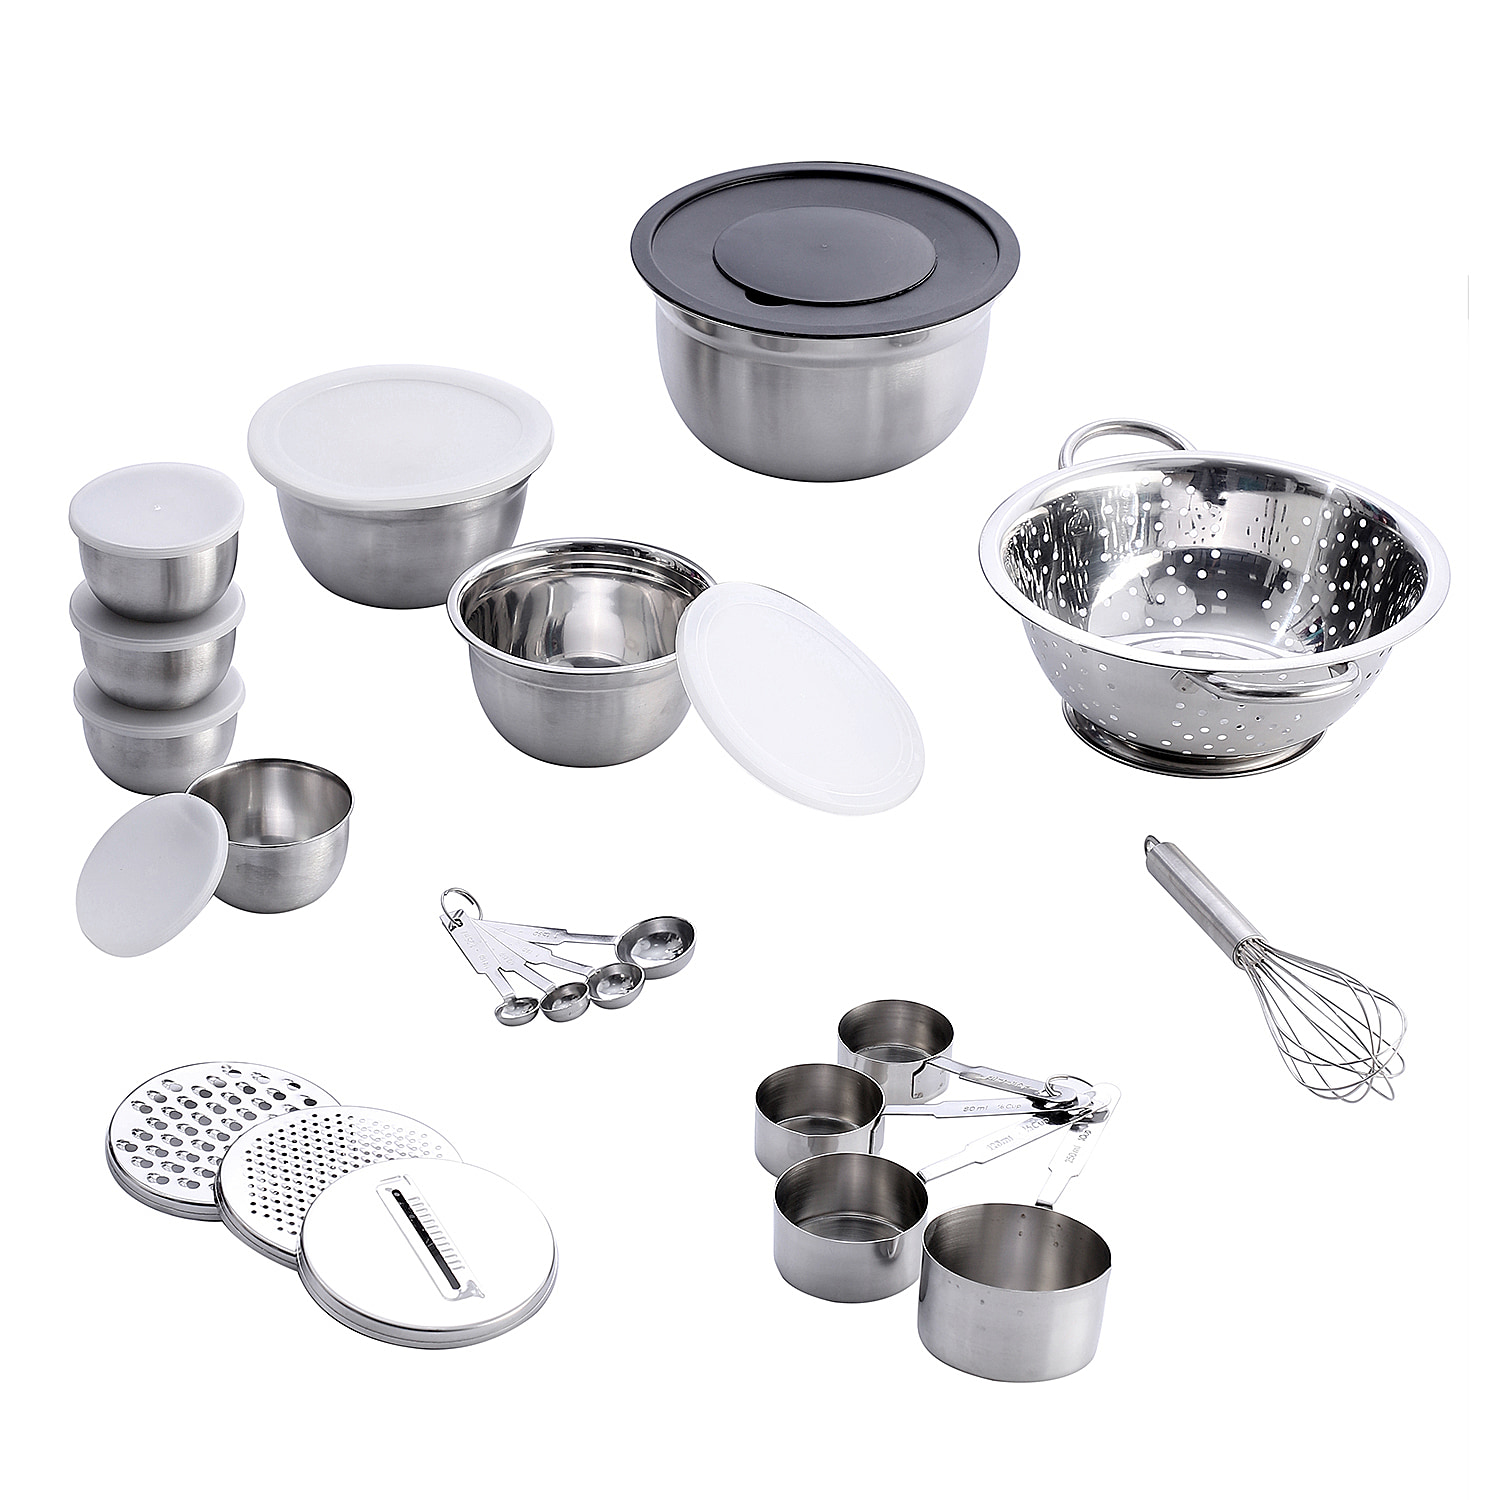 Set of 27 Kitchen Set is a Stainless Steel Collection of Food Prep Essentials for Cooking and Baking